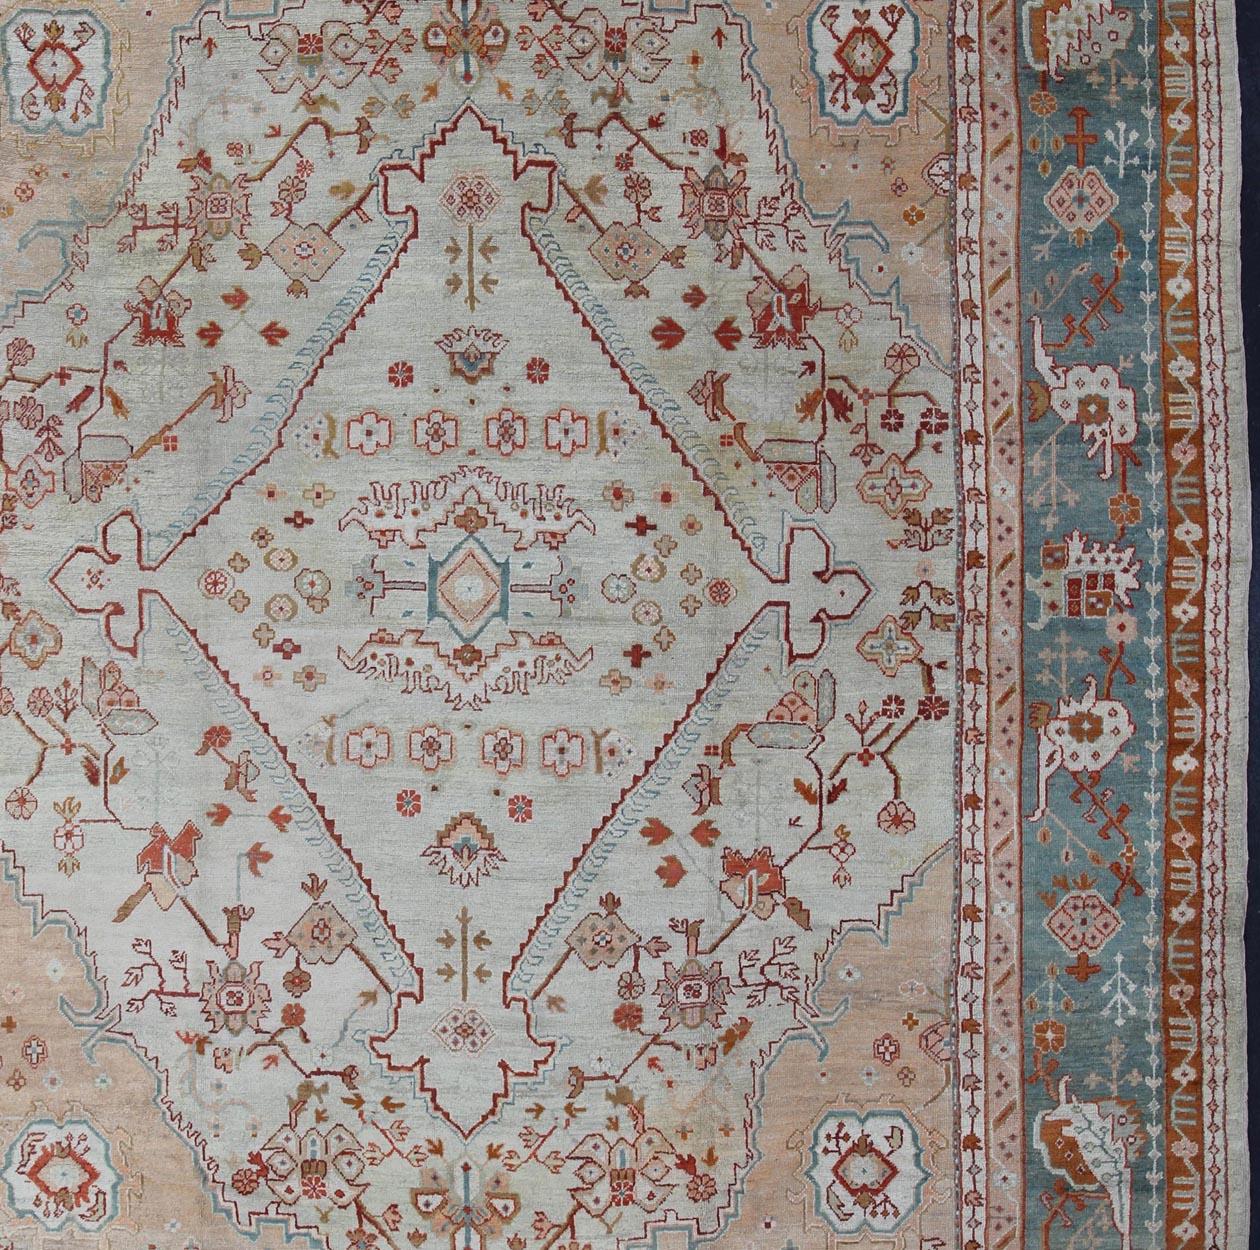 Antique Turkish Oushak rug in ice blue, taupe background and teal border. Keivan Woven Arts / rug VR-7967, country of origin / type: Turkey / Oushak, circa Early-20th century.
Measures: 12'1 x 14'10.
This magnificent Turkish Oushak carpet